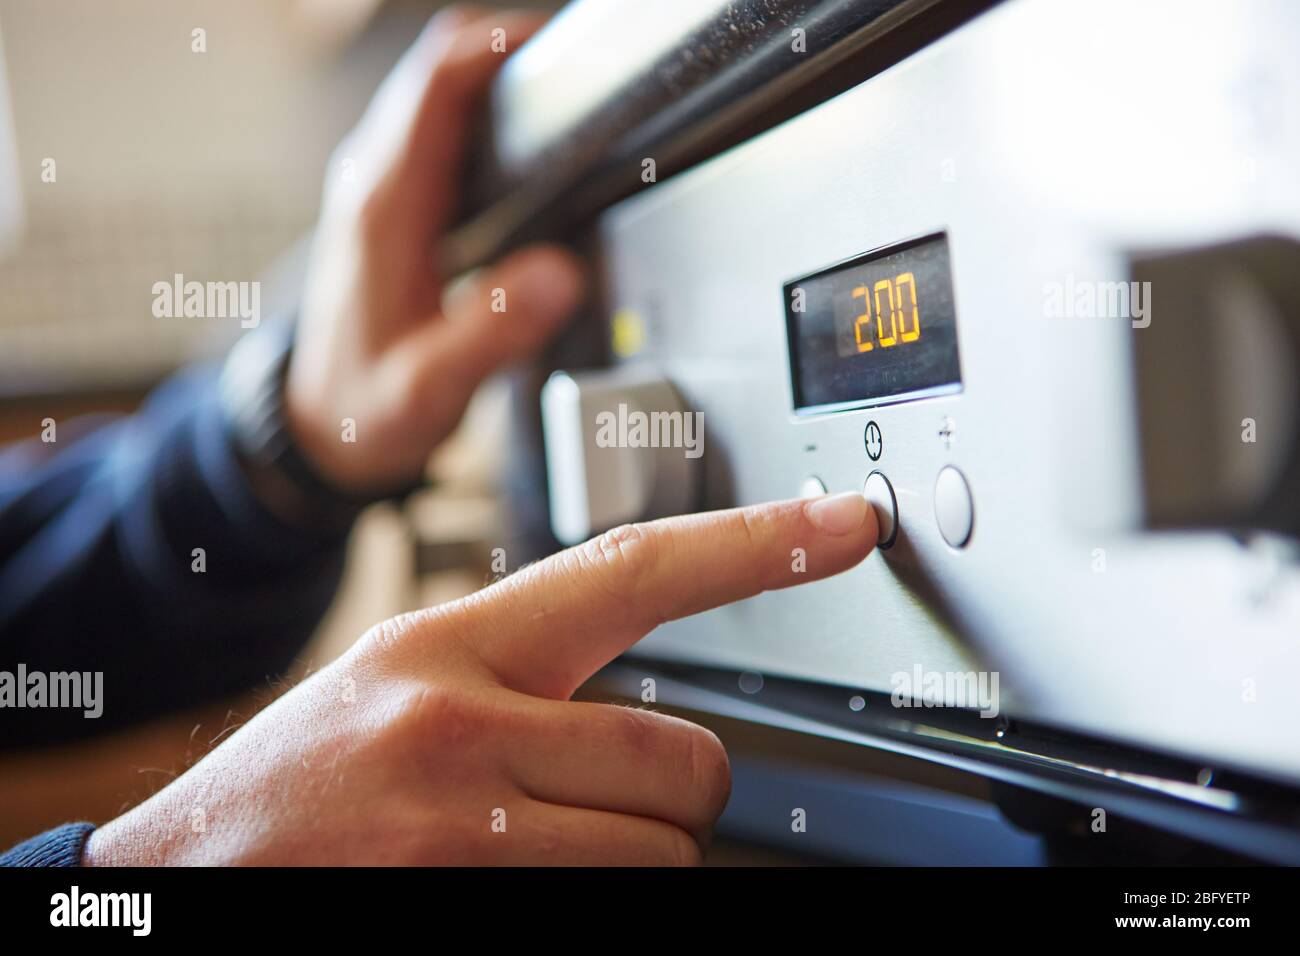 Close-up of a male hand starting a microwave oven for cooking food in kitchen at home, pushing a button. Stock Photo